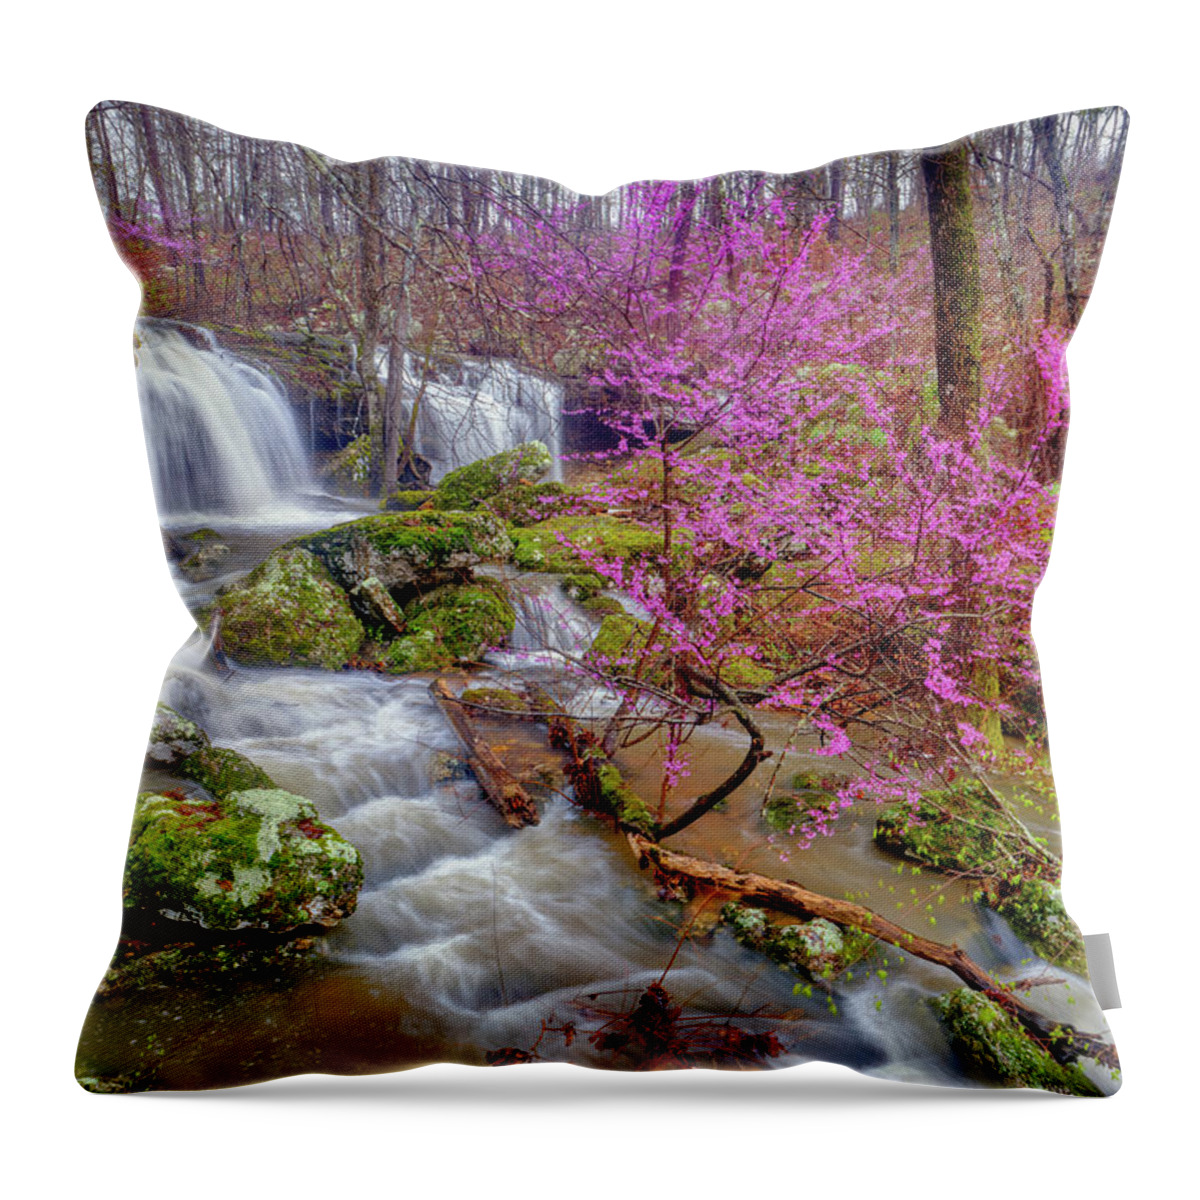 Waterfall Throw Pillow featuring the photograph Cowards Hollow Shut-ins III by Robert Charity